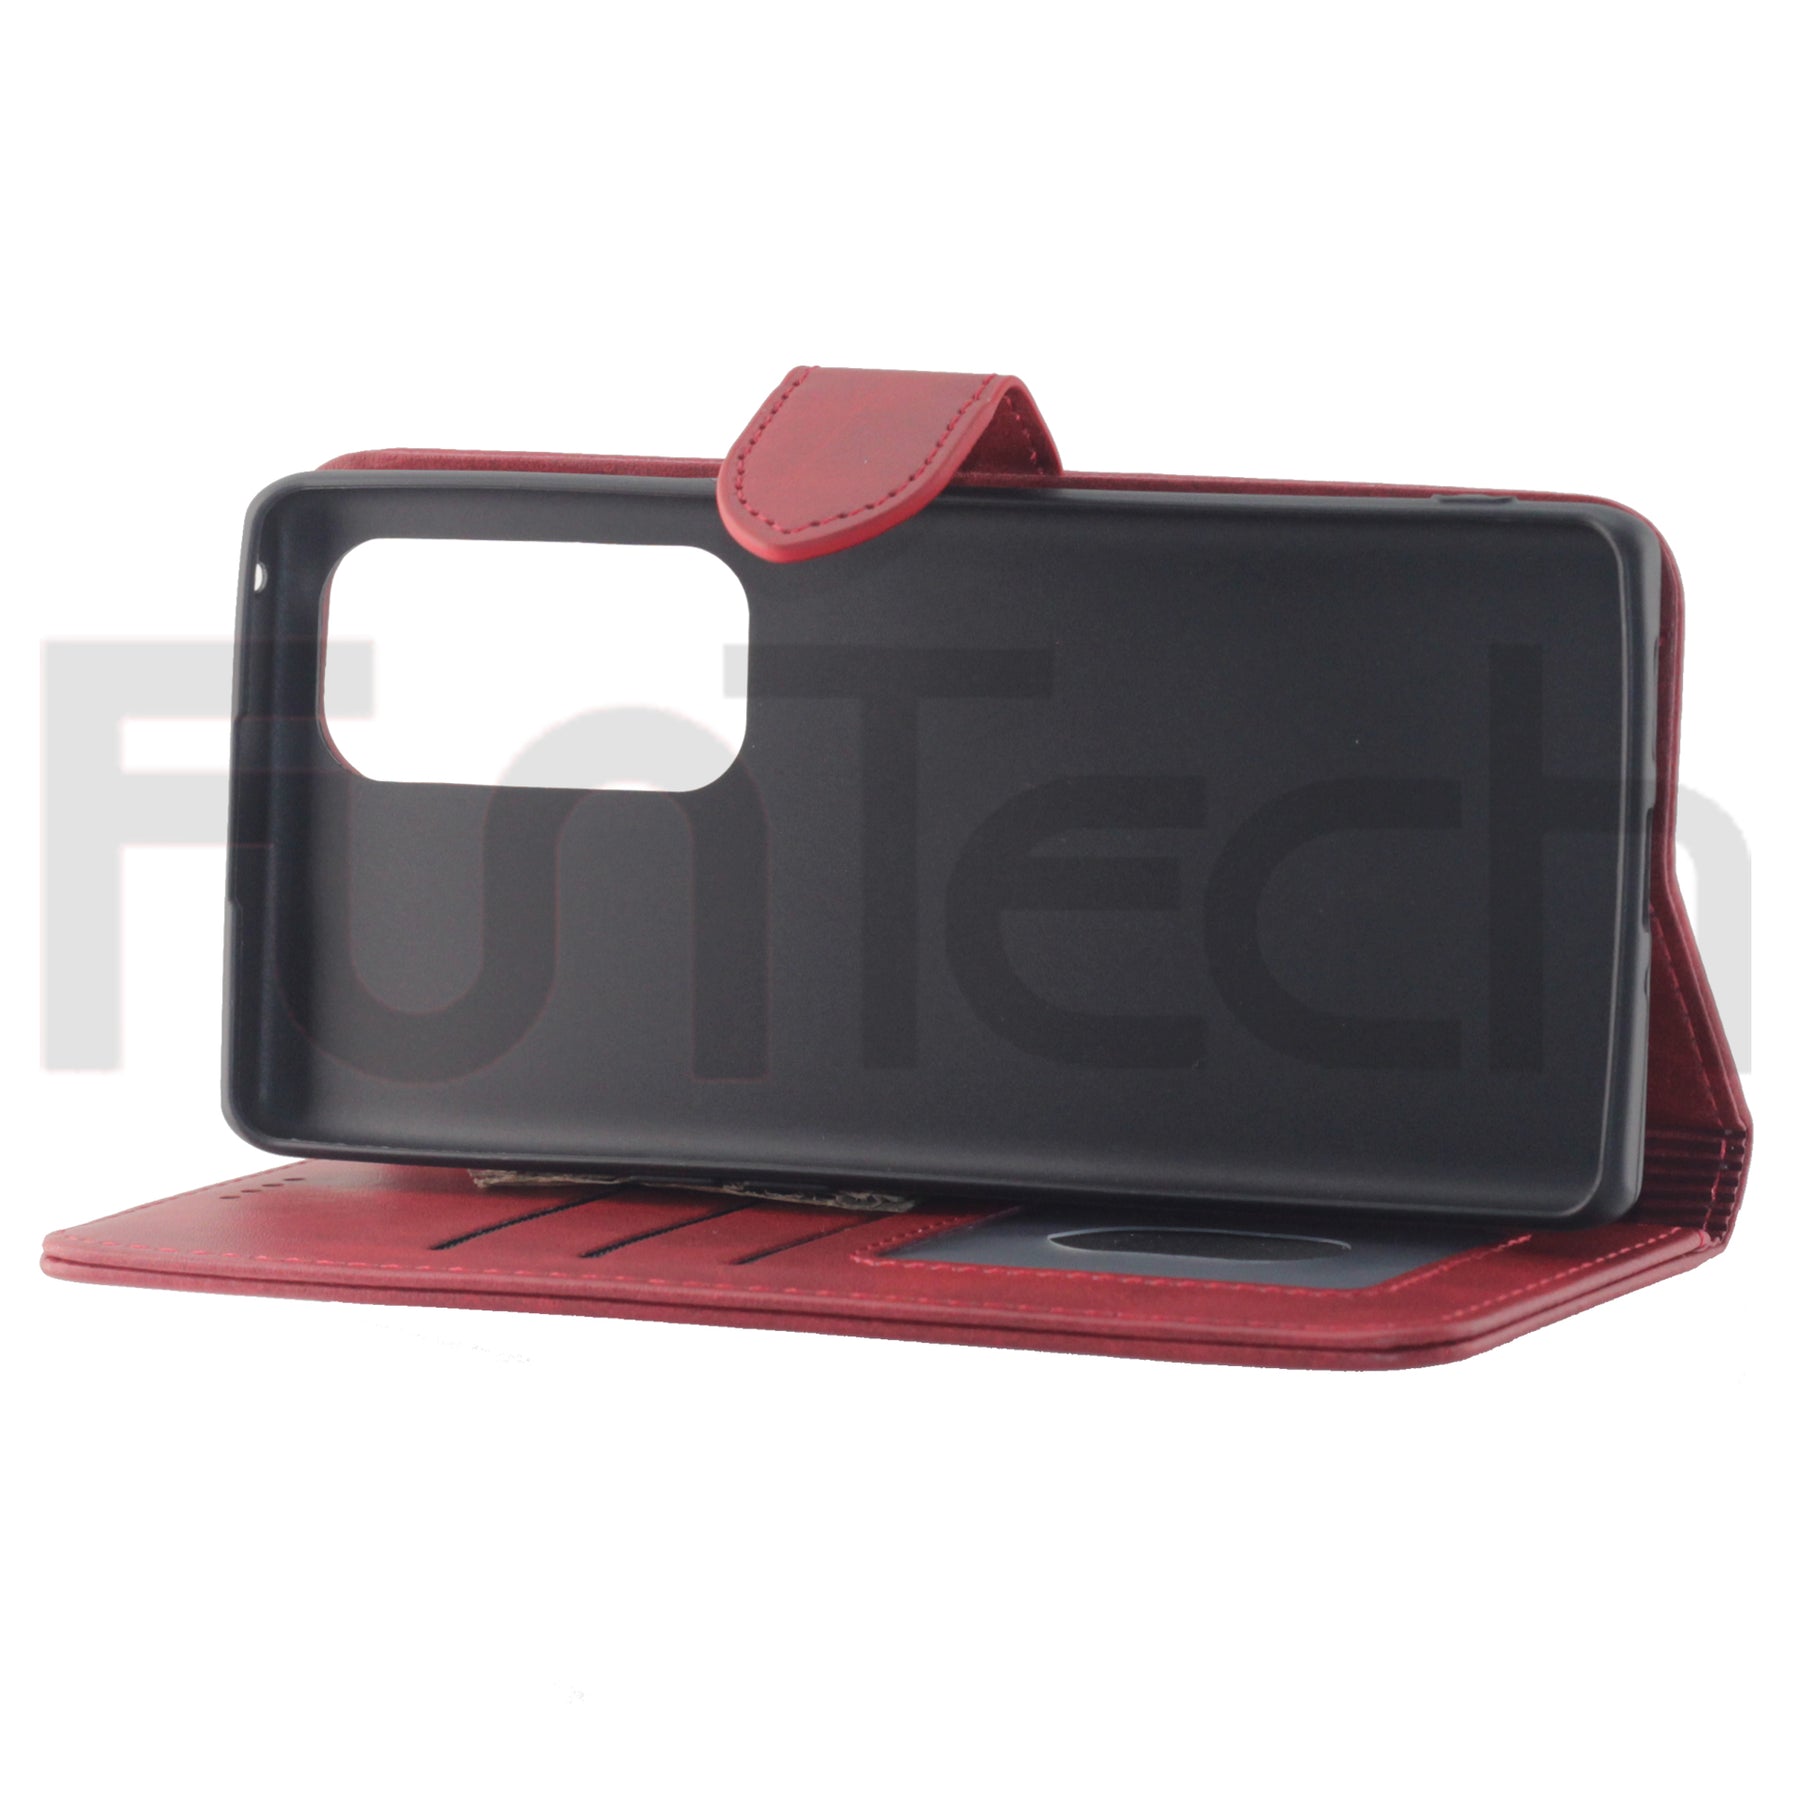 Oppo Find X3 Neo, Leather Wallet Case, Color Red.